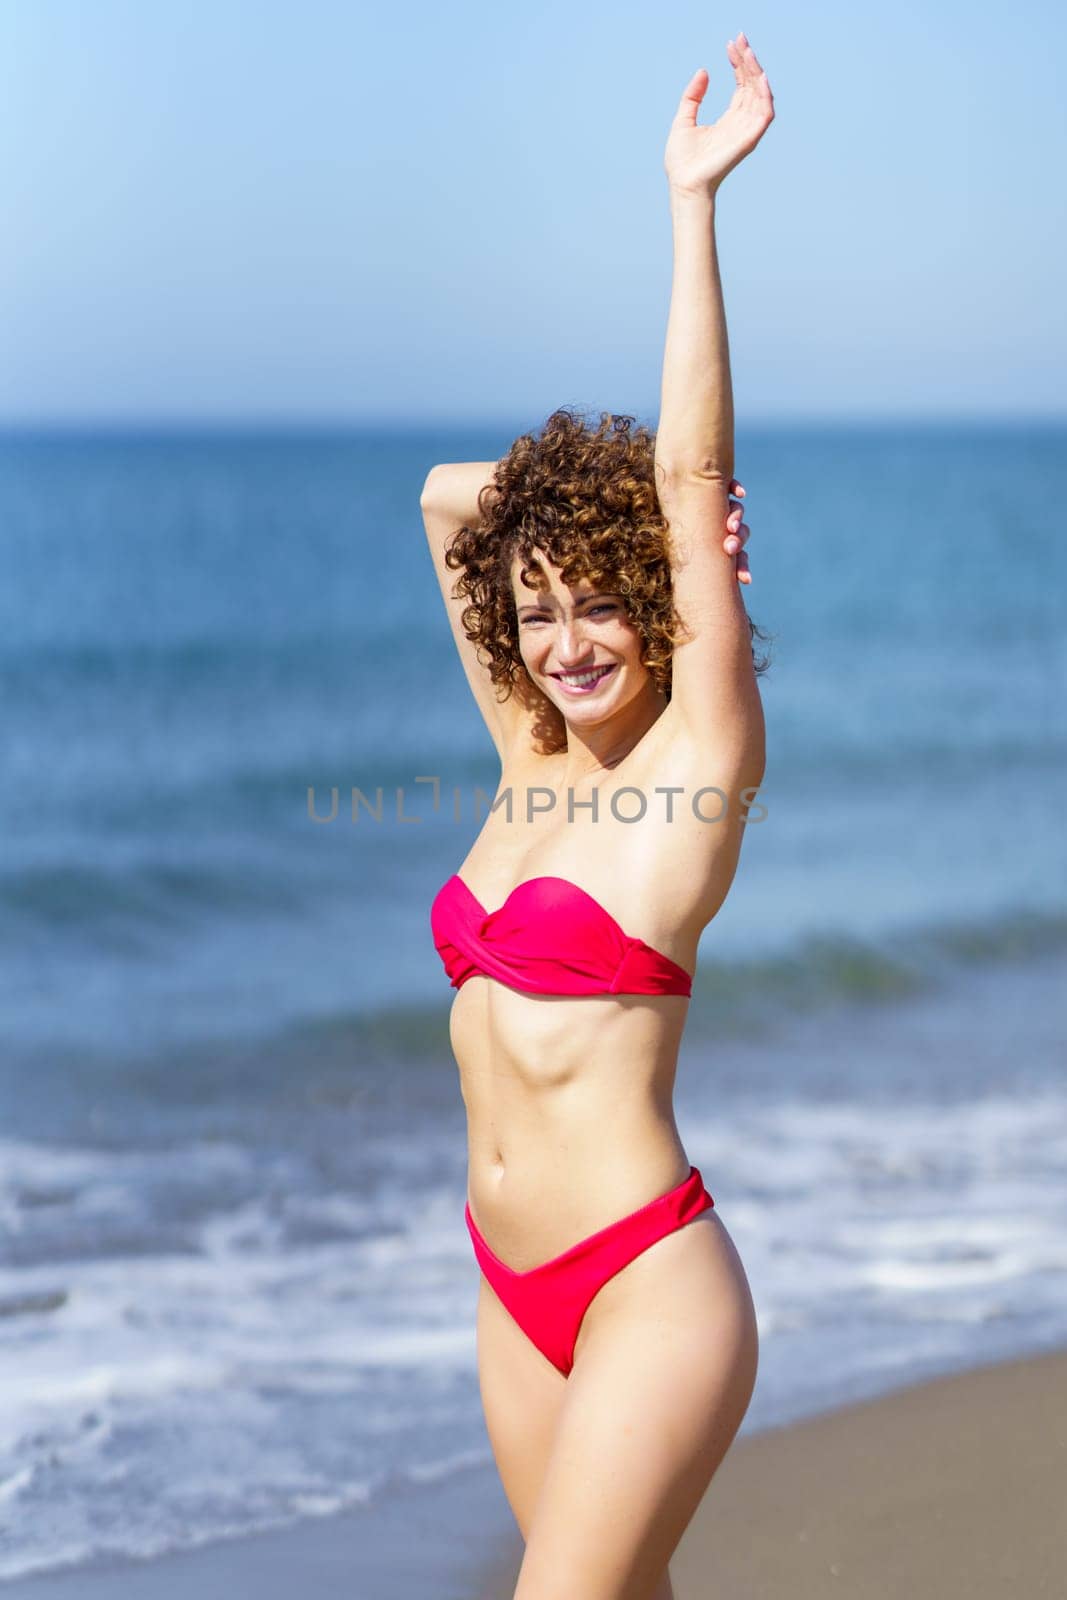 Cheerful young female redhead in pink bikini standing and touching outstretched arm with hand from behind head, while looking at camera in sunlight against blue seawater and sky